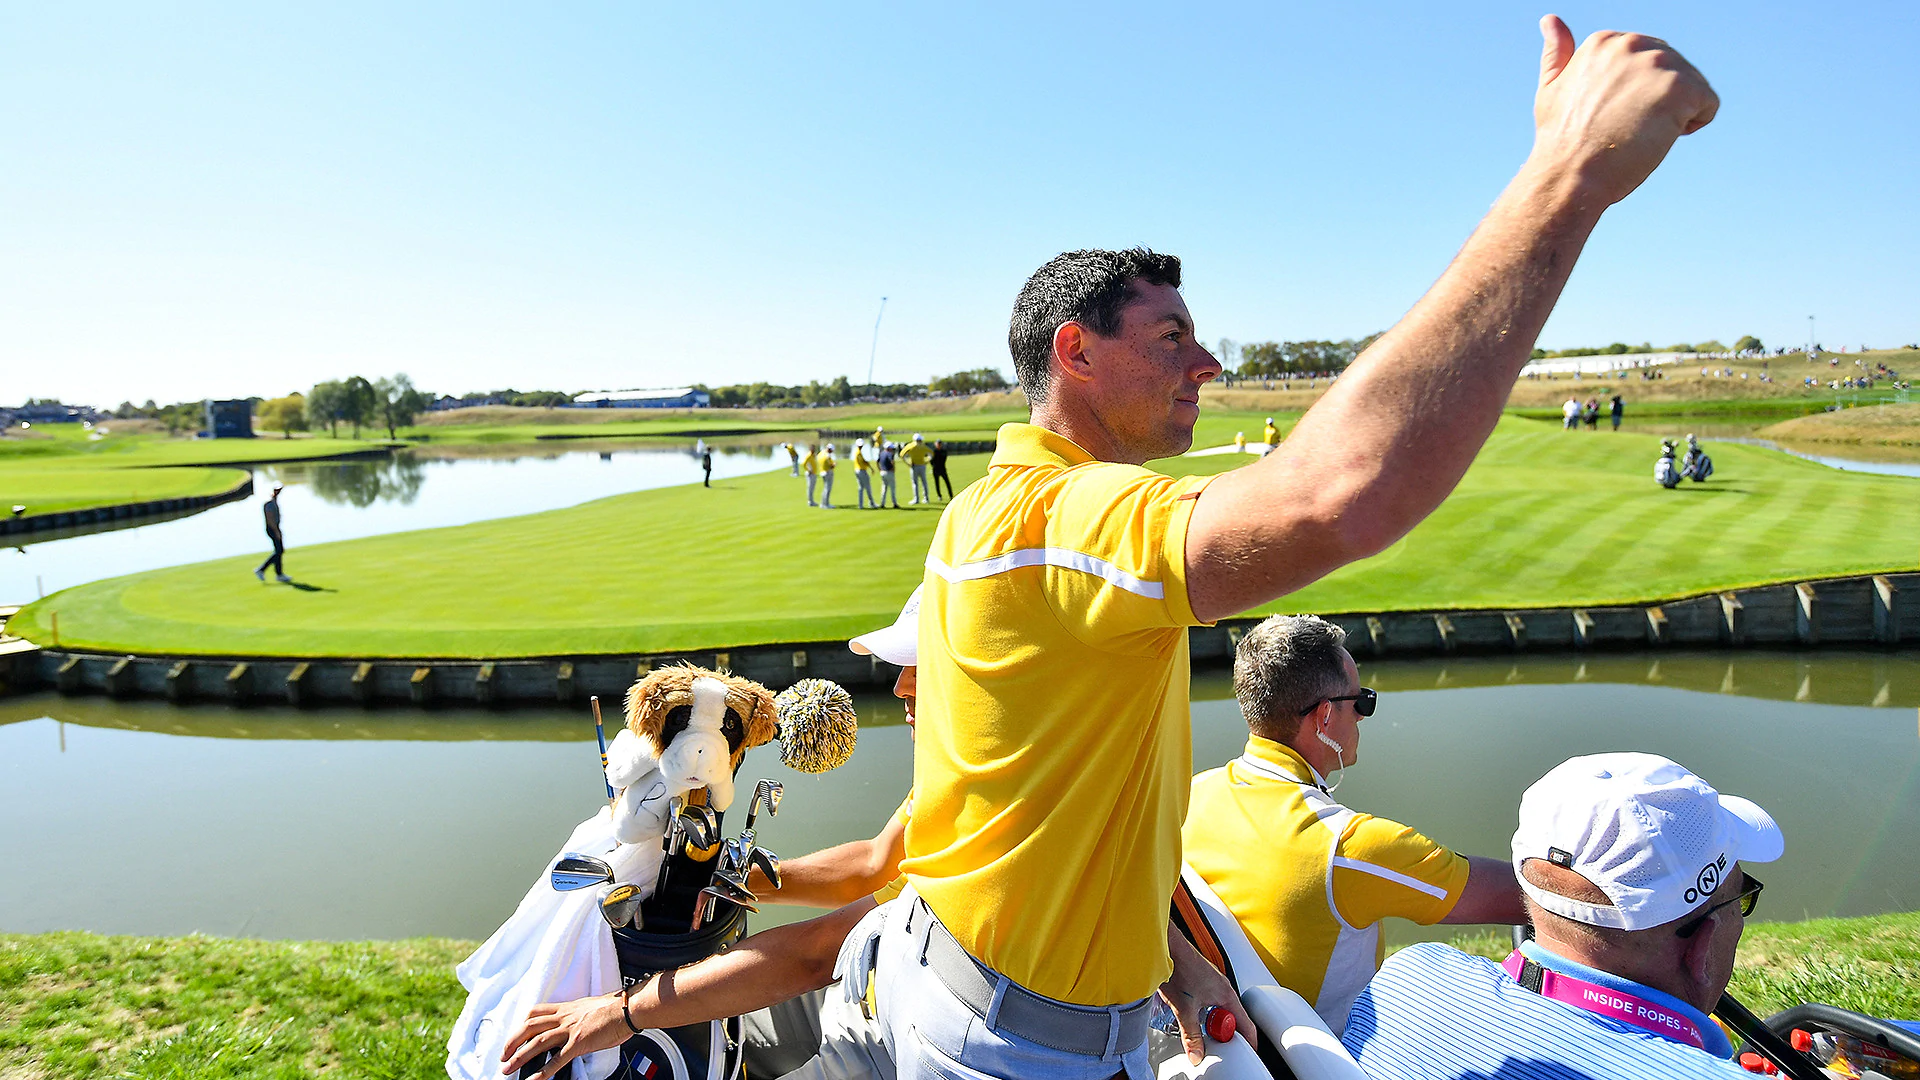 Punch Shot: Who wins, who is 'The Man' at the Ryder Cup?